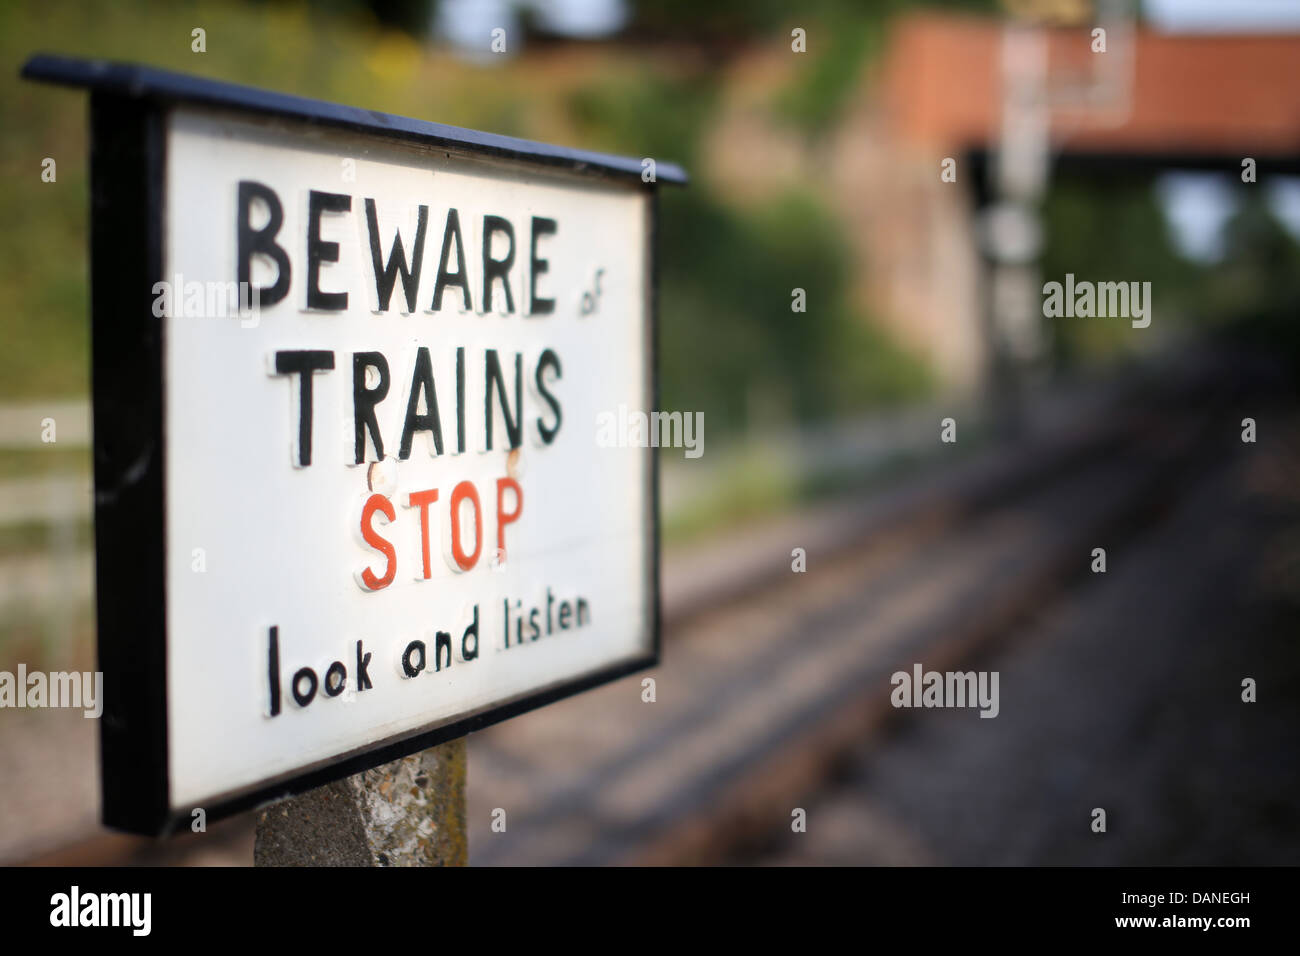 Beware of trains sign Stock Photo